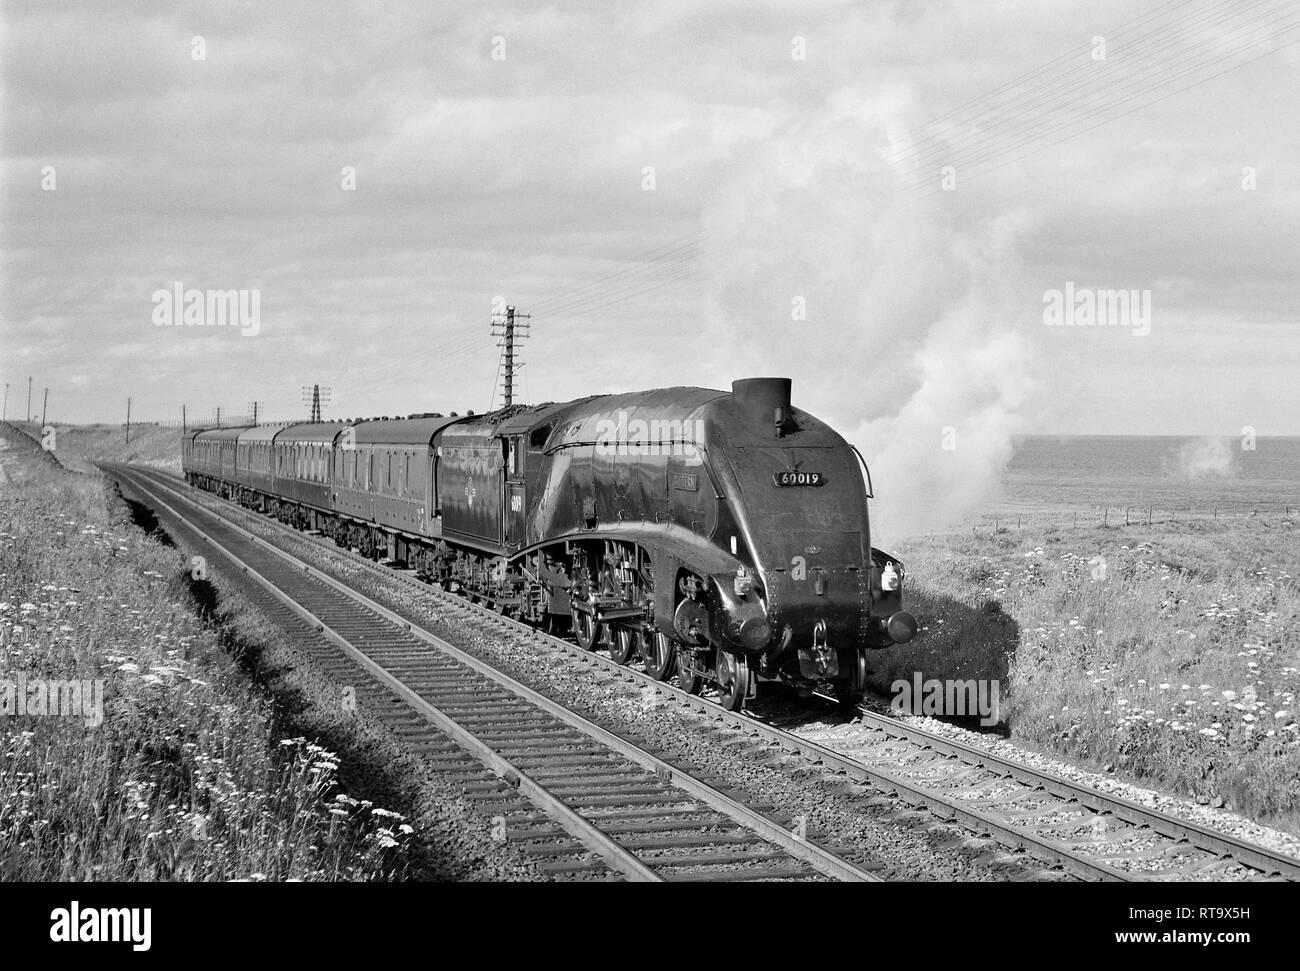 Streamlined A4 4-6-2 Pacific No. 60019 Bittern hauling the 17.30 Aberdeen to Glasgow 3 hour express at Cove Bay in July 1965 Stock Photo